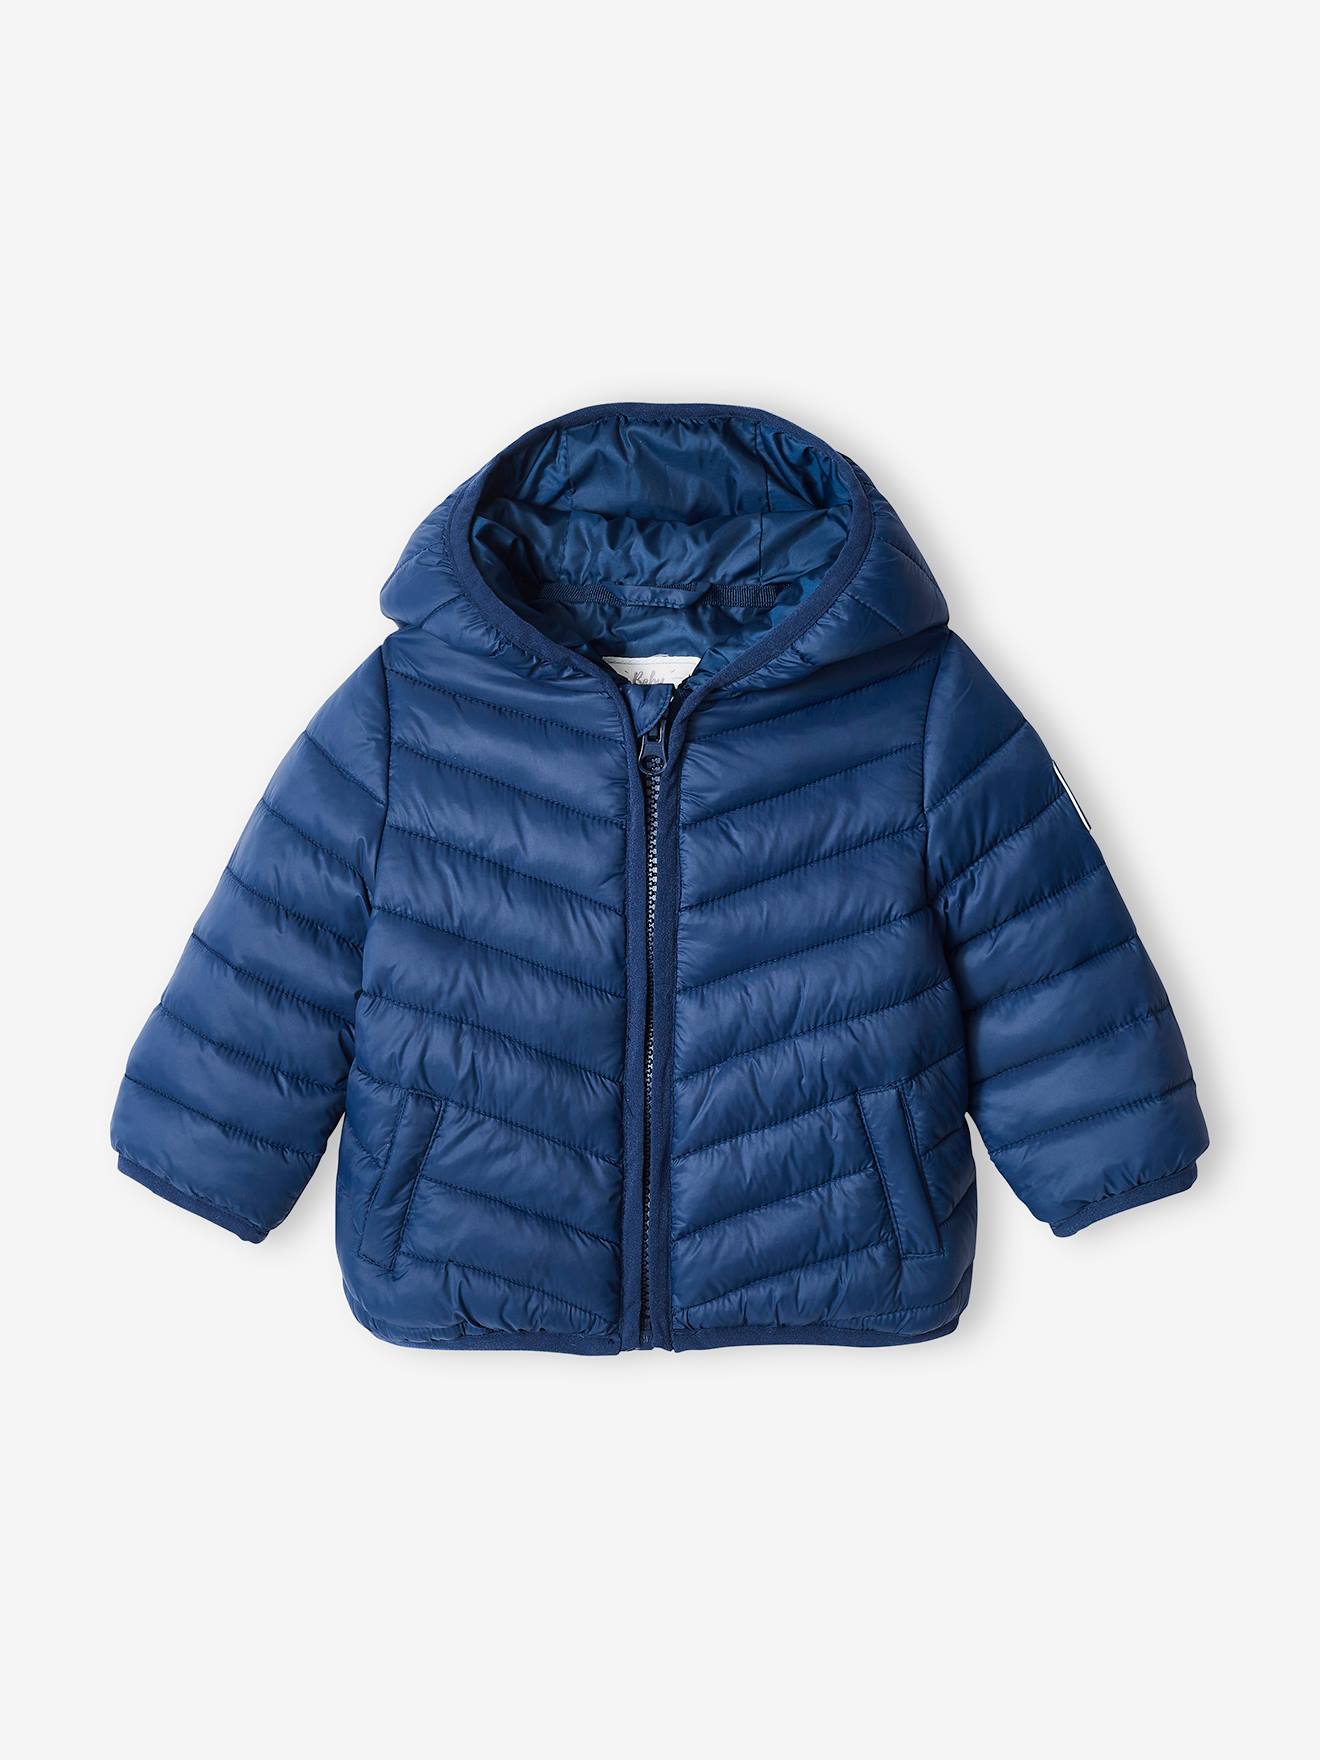 Lightweight Padded Jacket with Hood for Babies blue dark solid